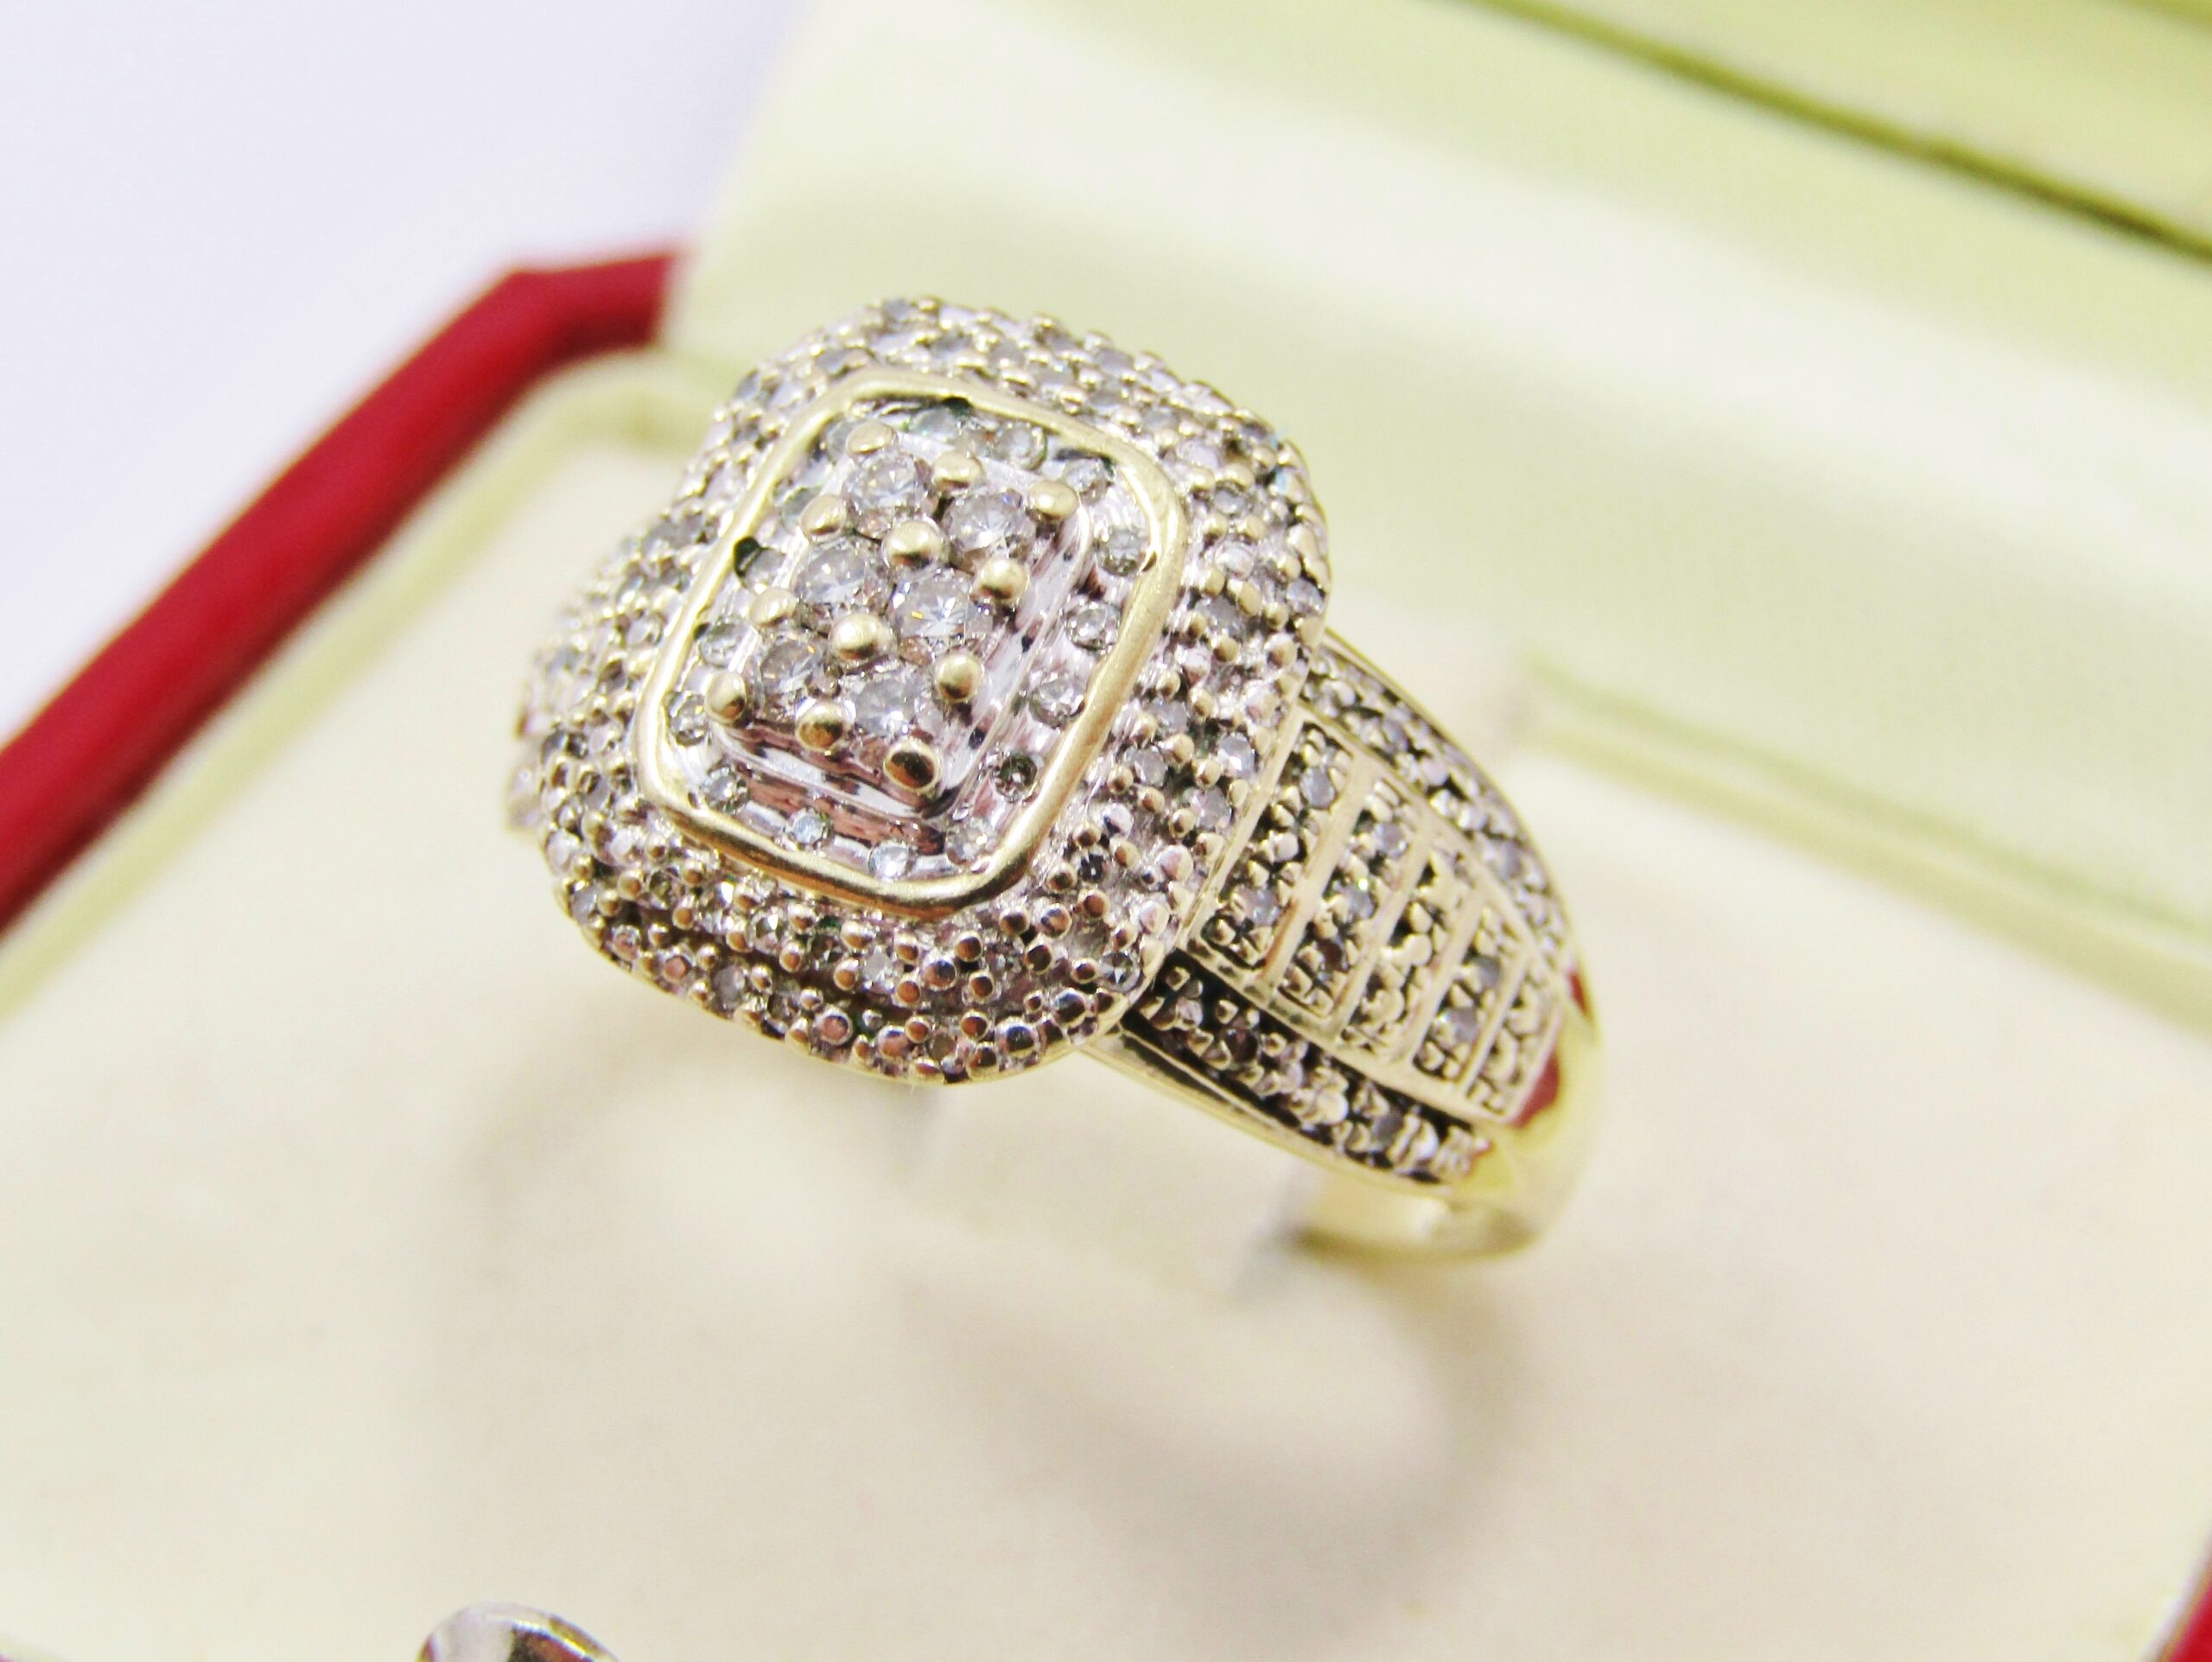 A Beautiful Micro Set 9ct Gold Ring With Diamonds